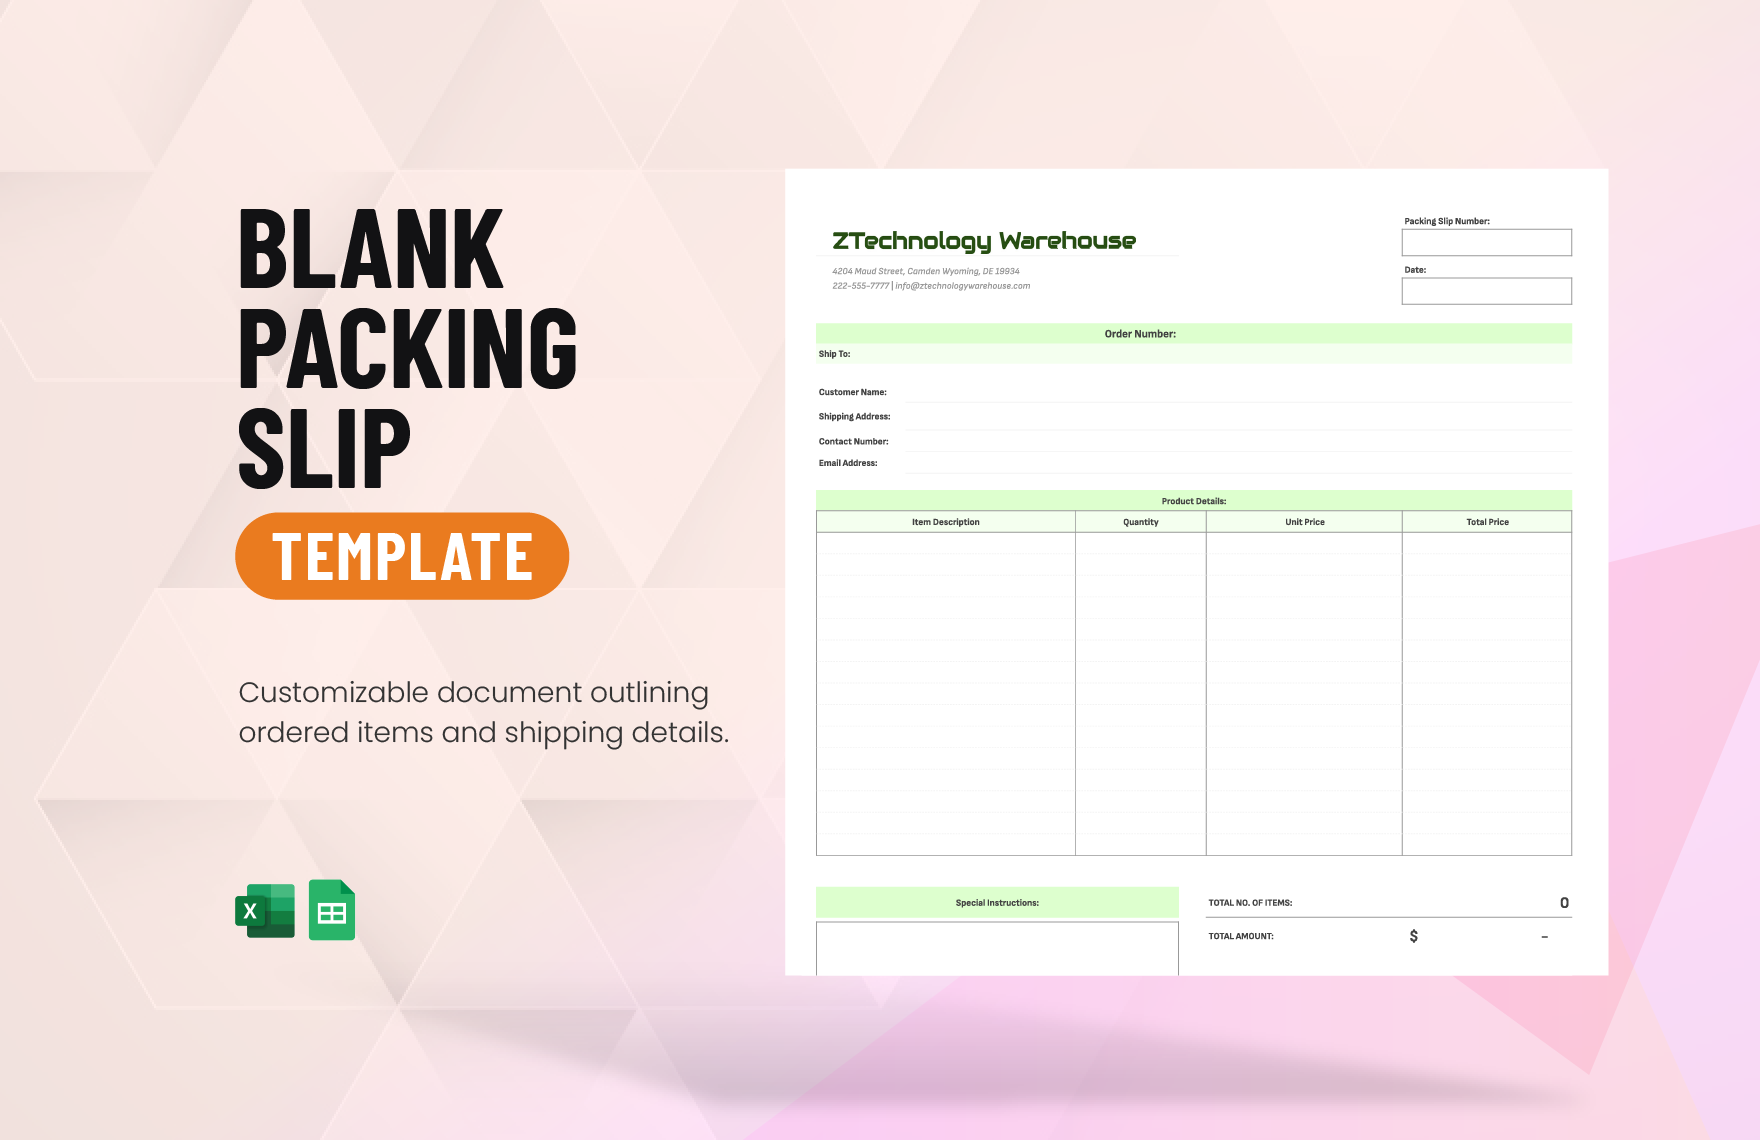 Blank Packing Slip Template in Excel, Google Sheets